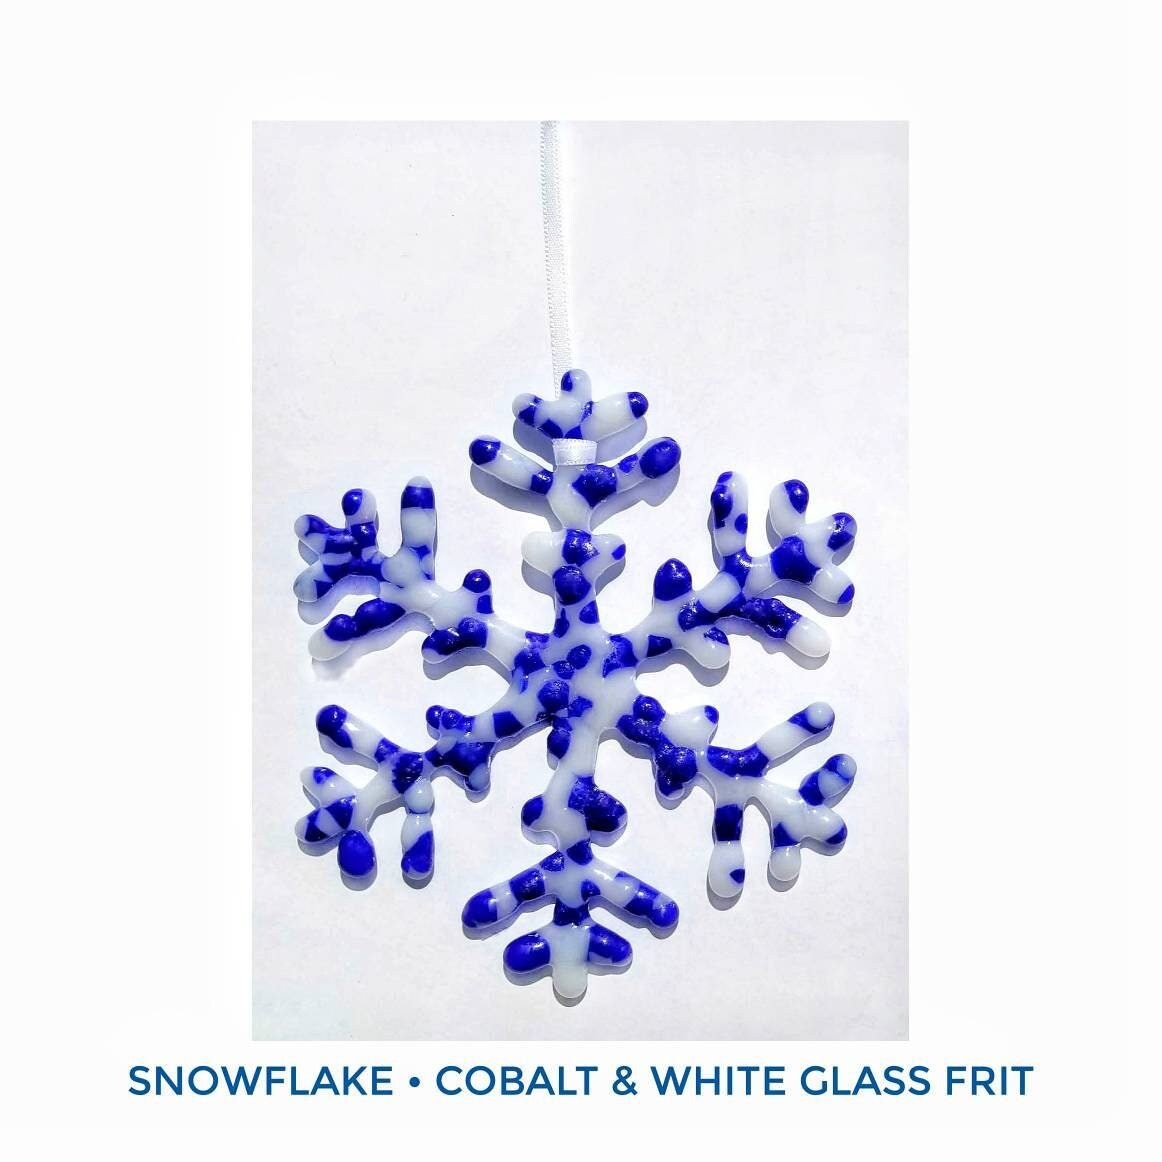 Winter Snowflake, Kiln Fused Glass. Cobalt Blue & White Ornament. A pretty Christmas gift, includes clear padded box. Hanauka holiday.